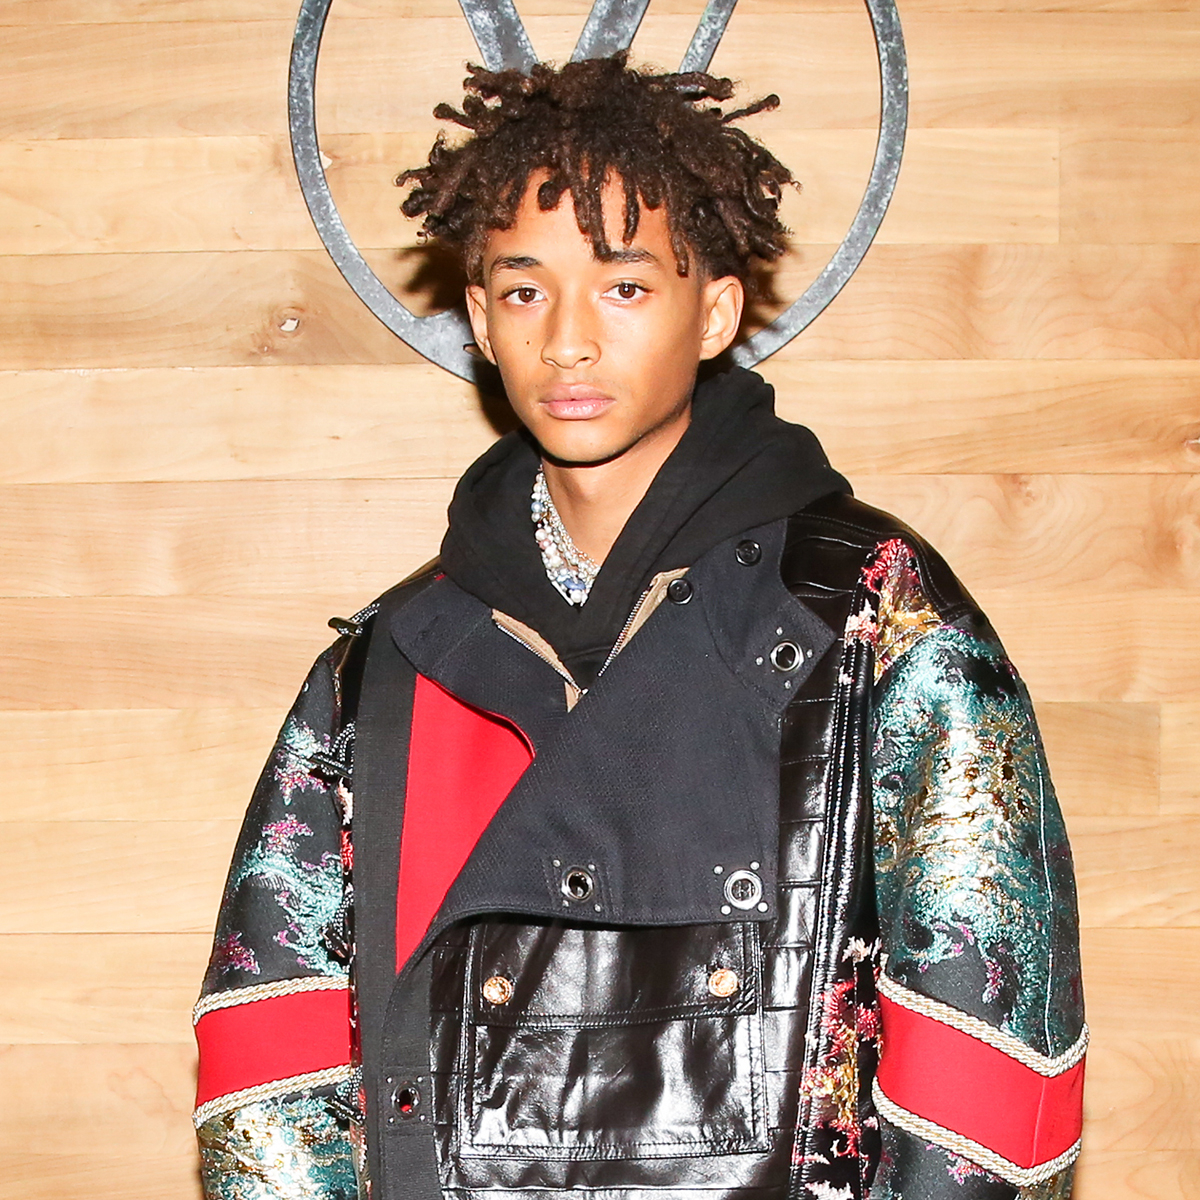 Jaden Smith Is Gender-Fluid for This New Shirtless Photo: Photo 3560882, Jaden  Smith, Magazine, Shirtless, Willow Smith Photos